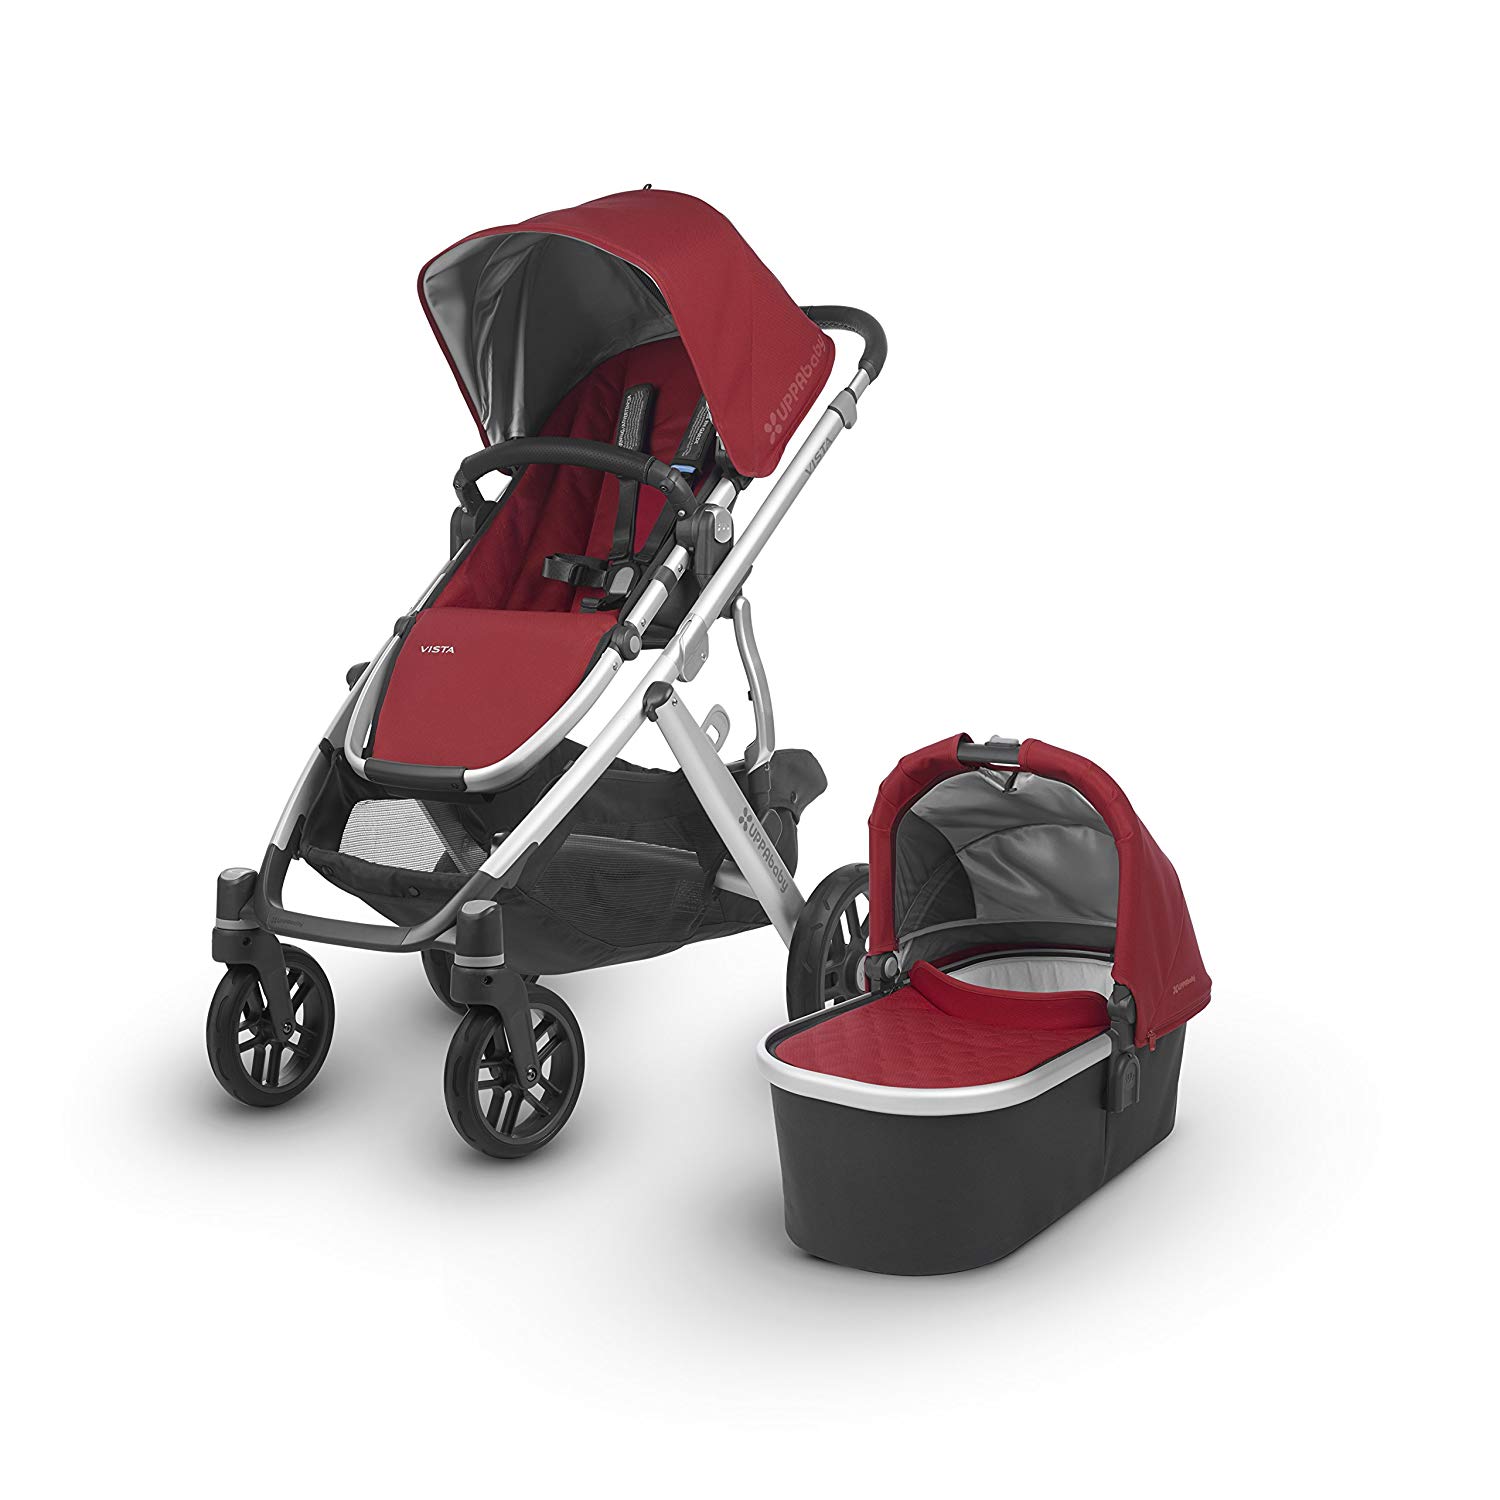 baby prams and pushchairs